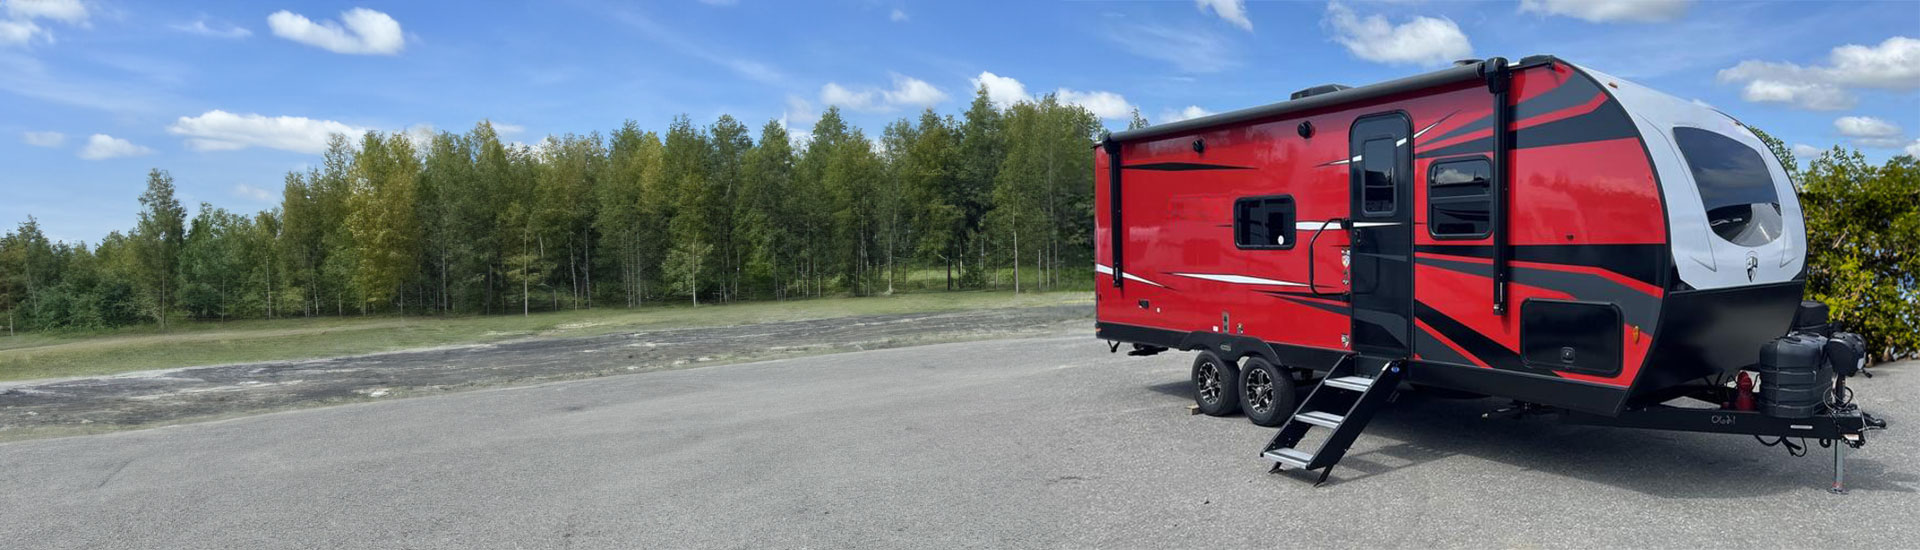 Red Travel Trailer Wraps